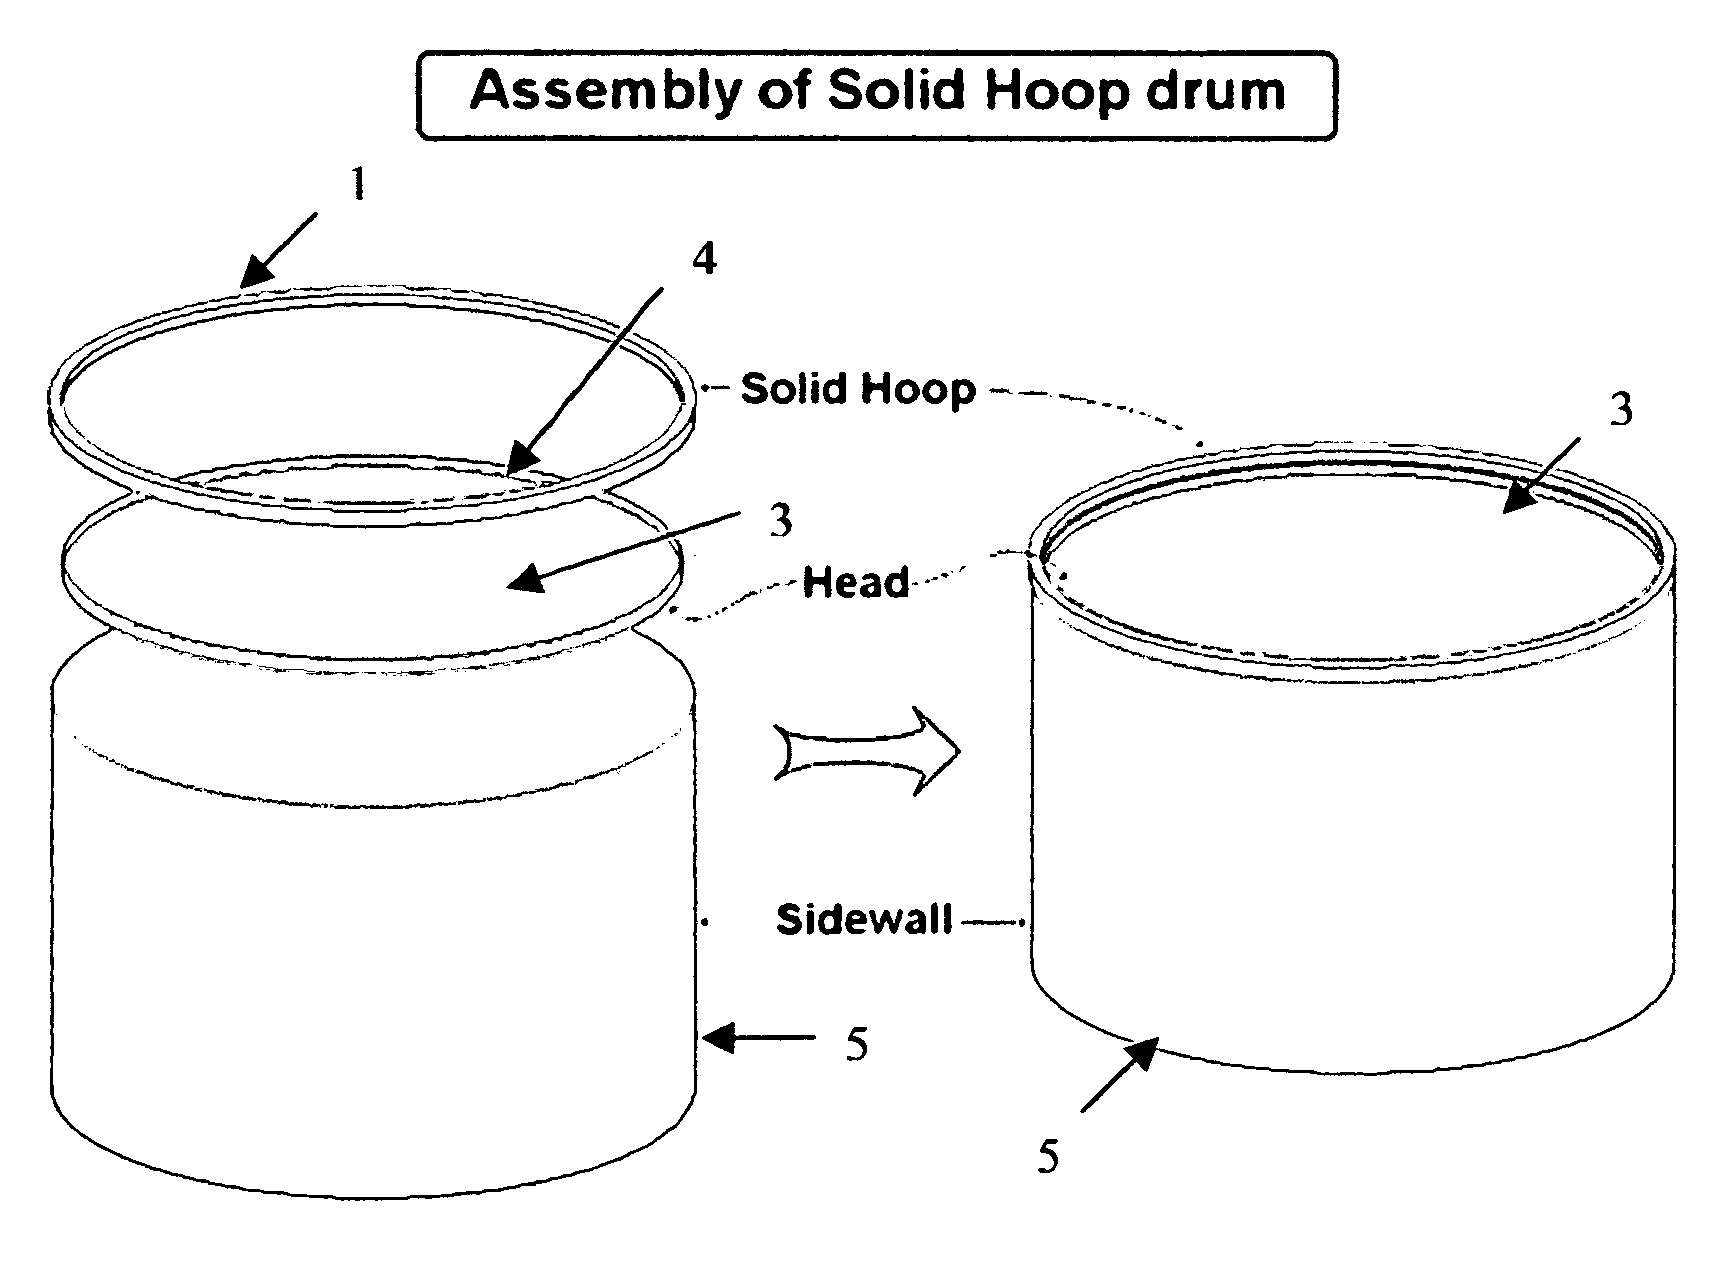 Pan musical instruments and methods for making same